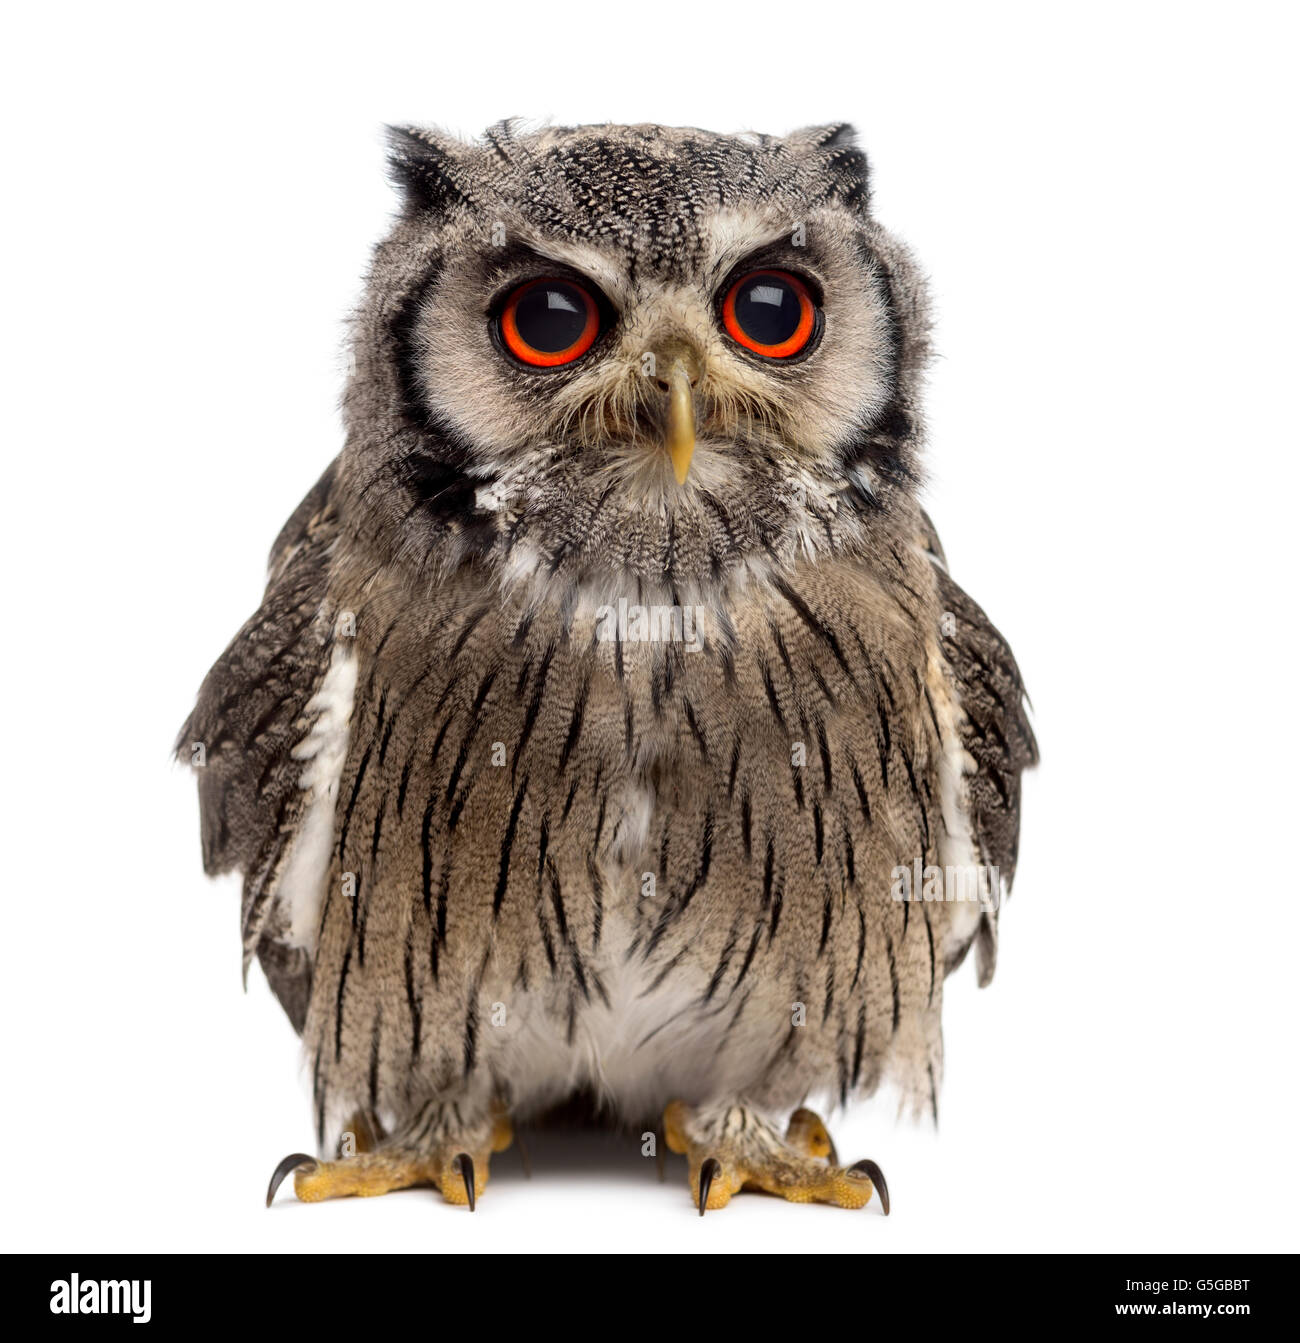 Northern white-faced owl - Ptilopsis leucotis (1 year old) in front of a white background Stock Photo